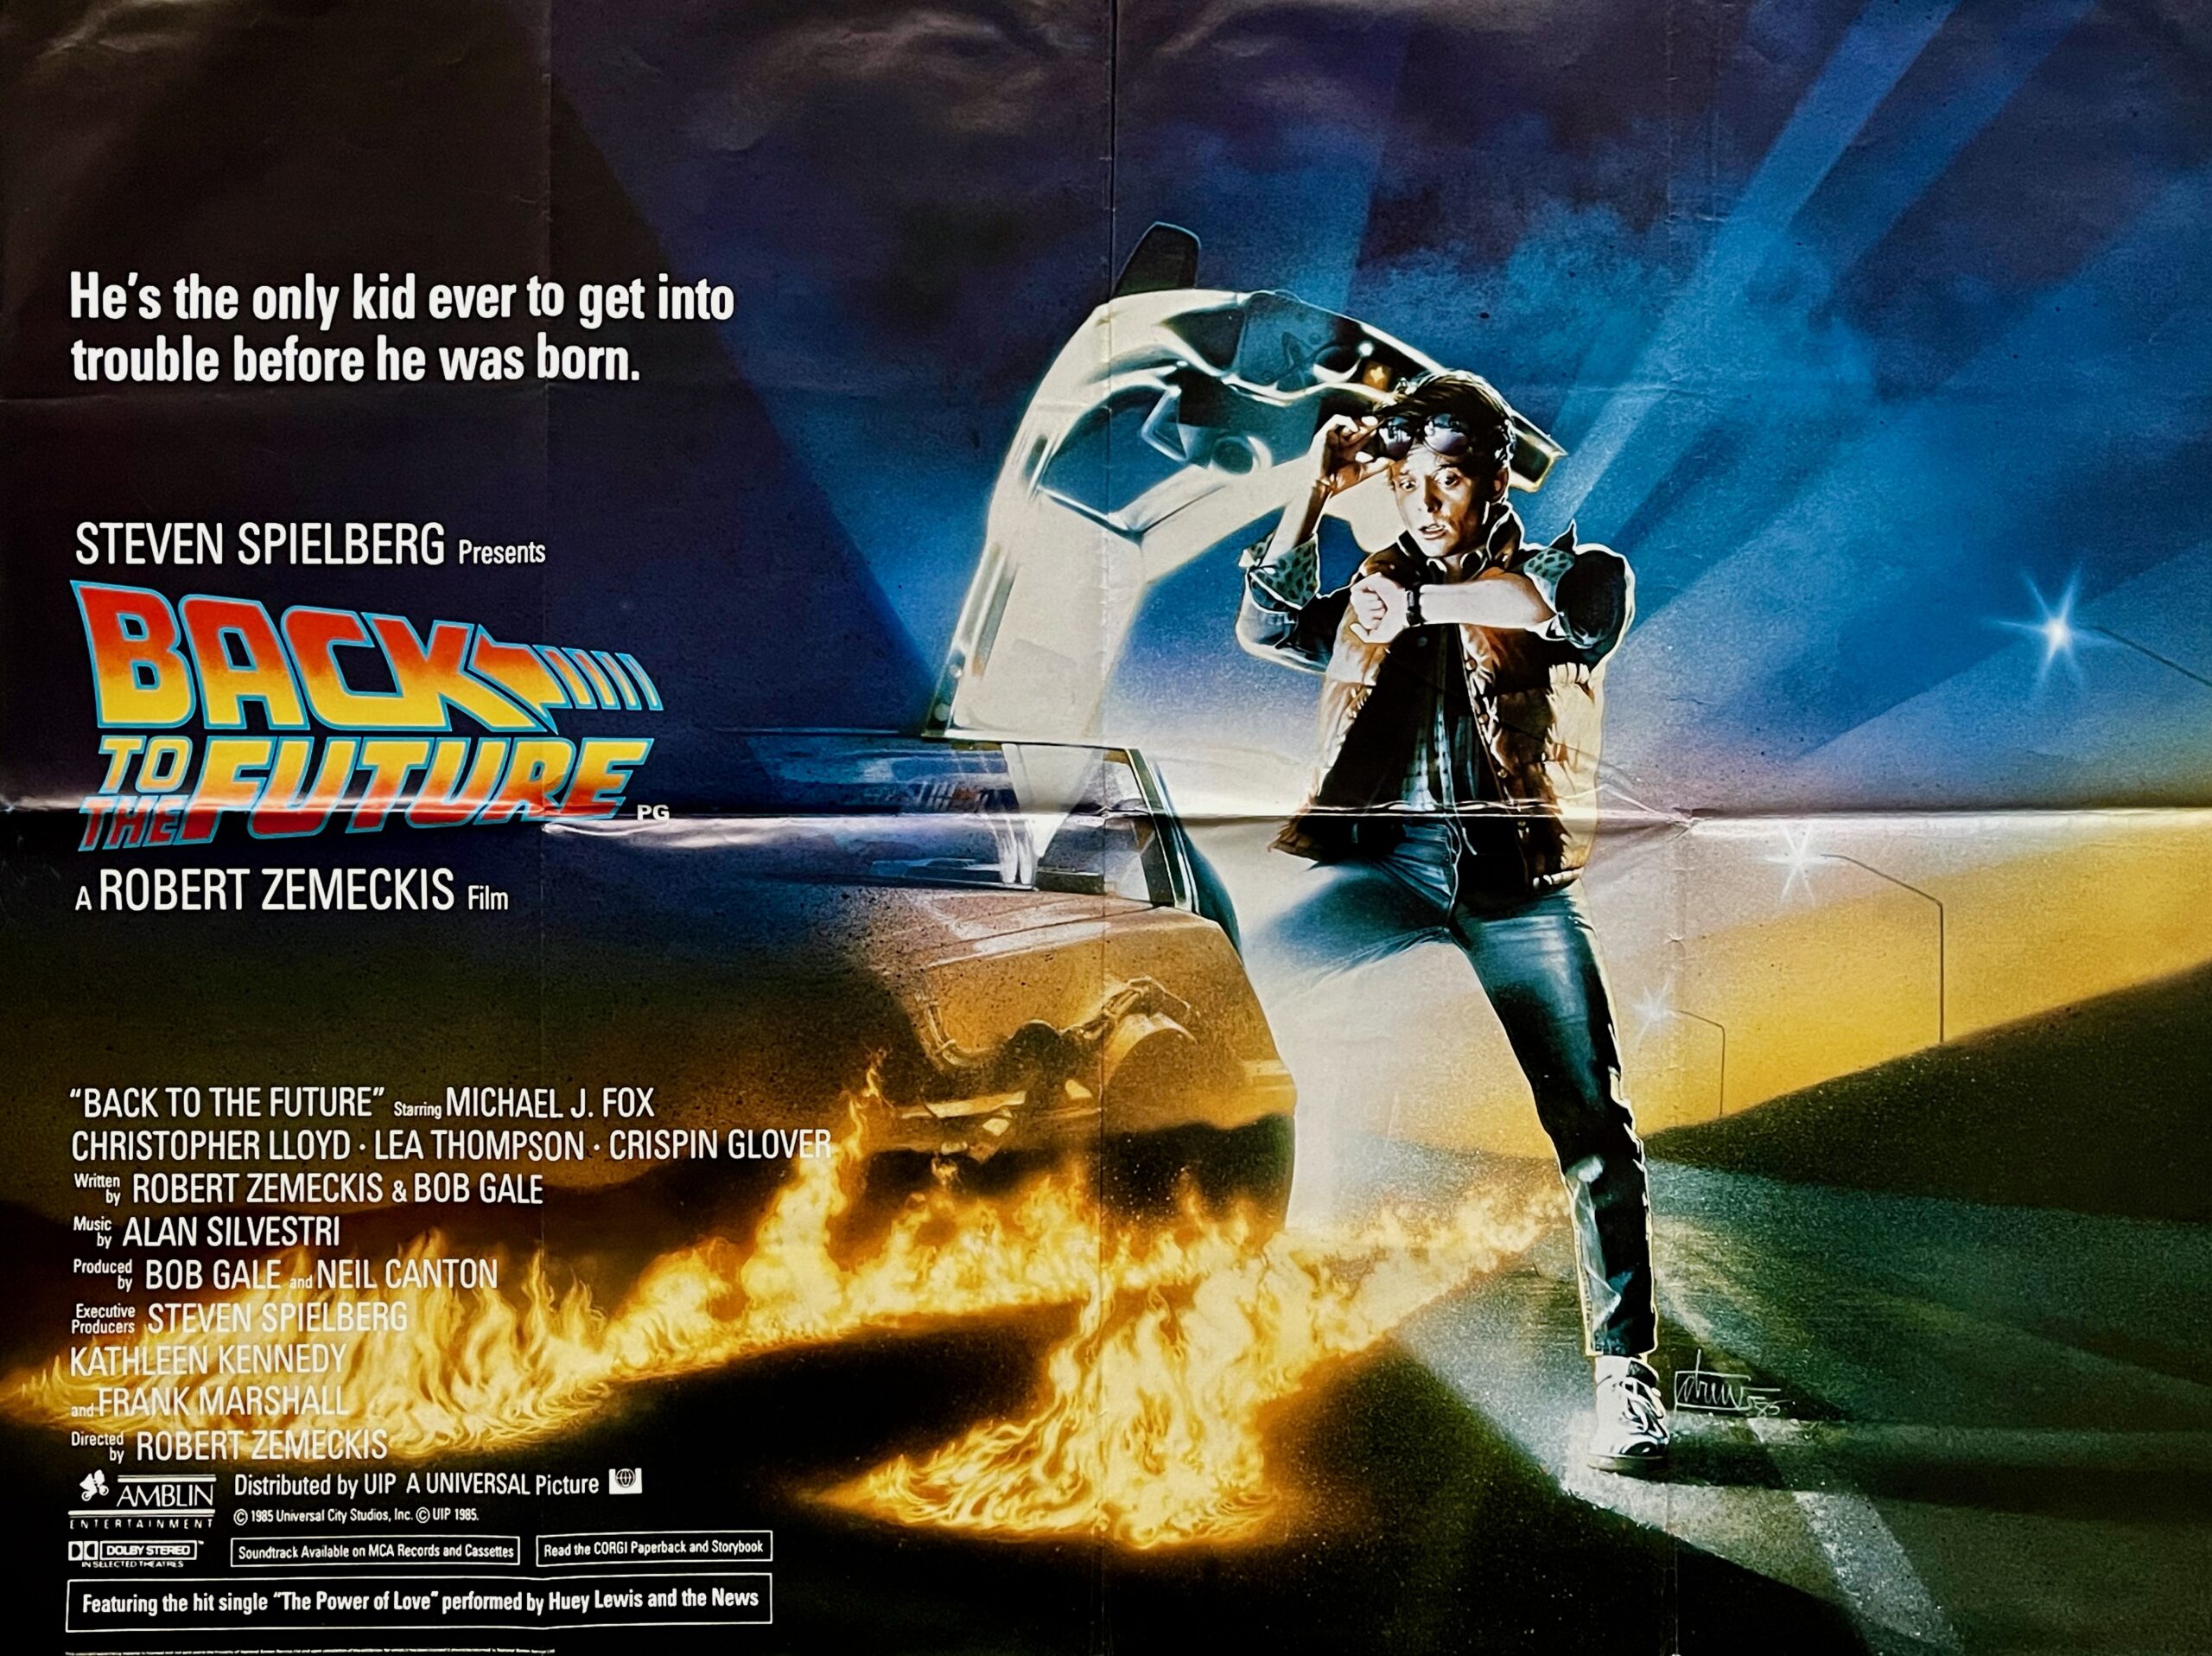 271809 back to the Future Classic Movie Print Glossy Poster De 